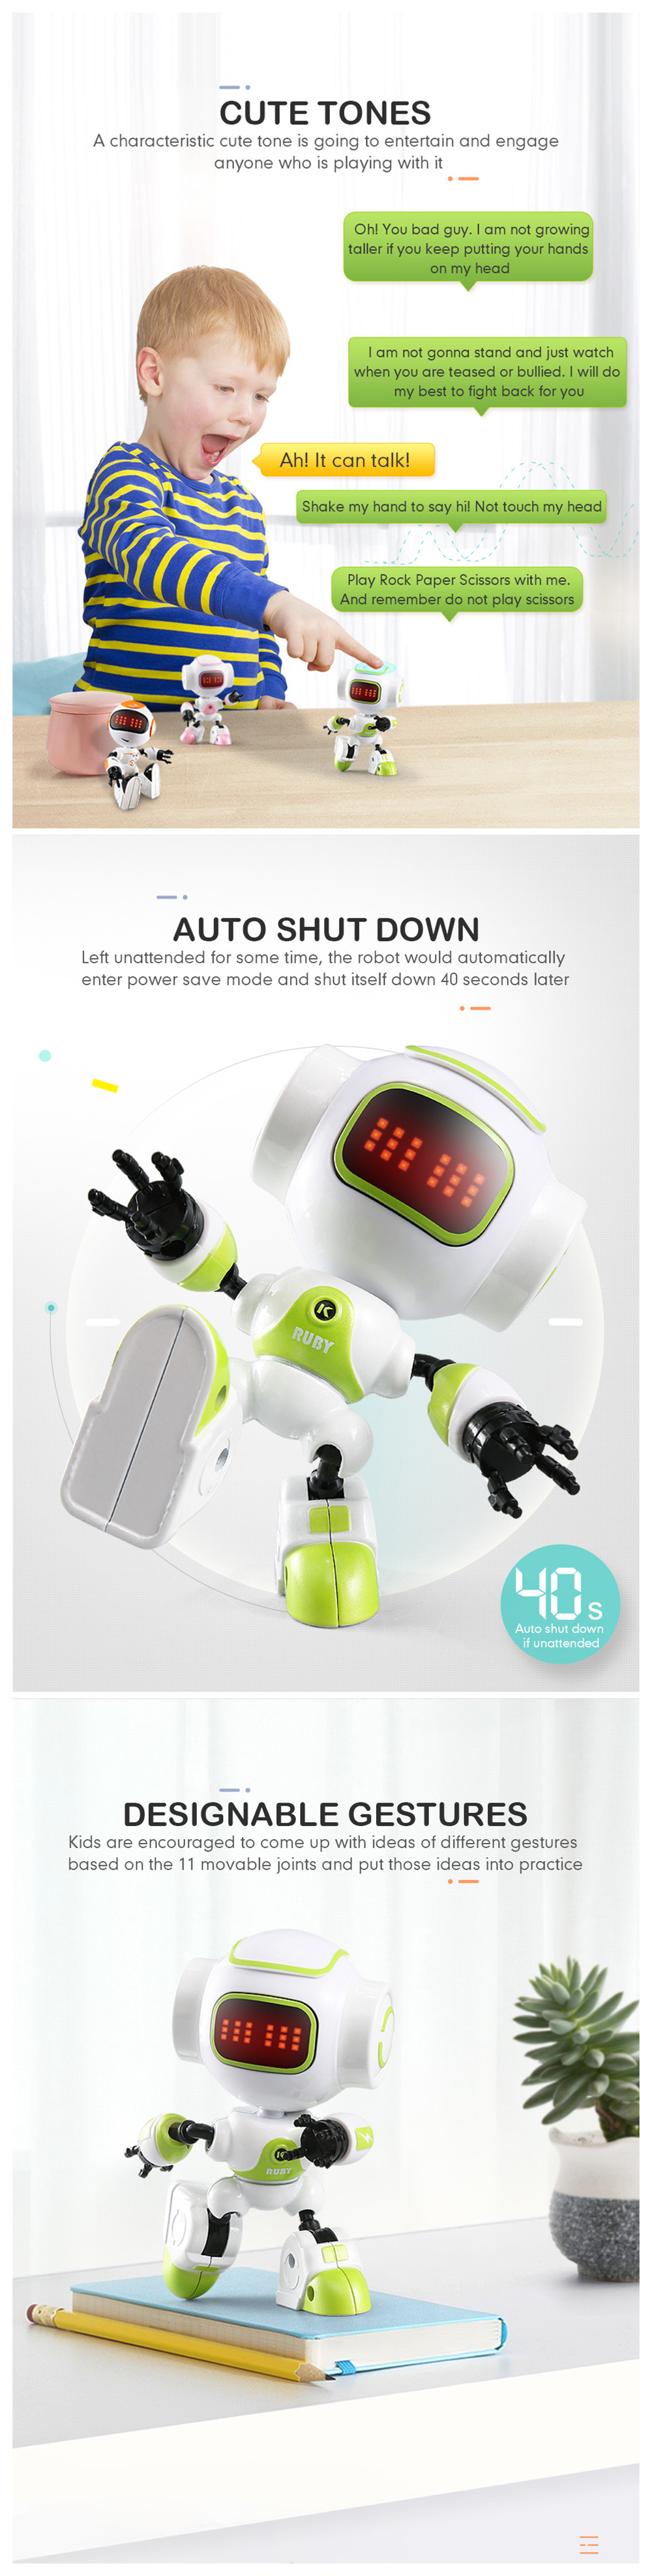 JJRC-R9-RUBY-Touch-Control-DIY-Gesture-Mini-Smart-Voiced-Alloy-Robot-Toy-1309897